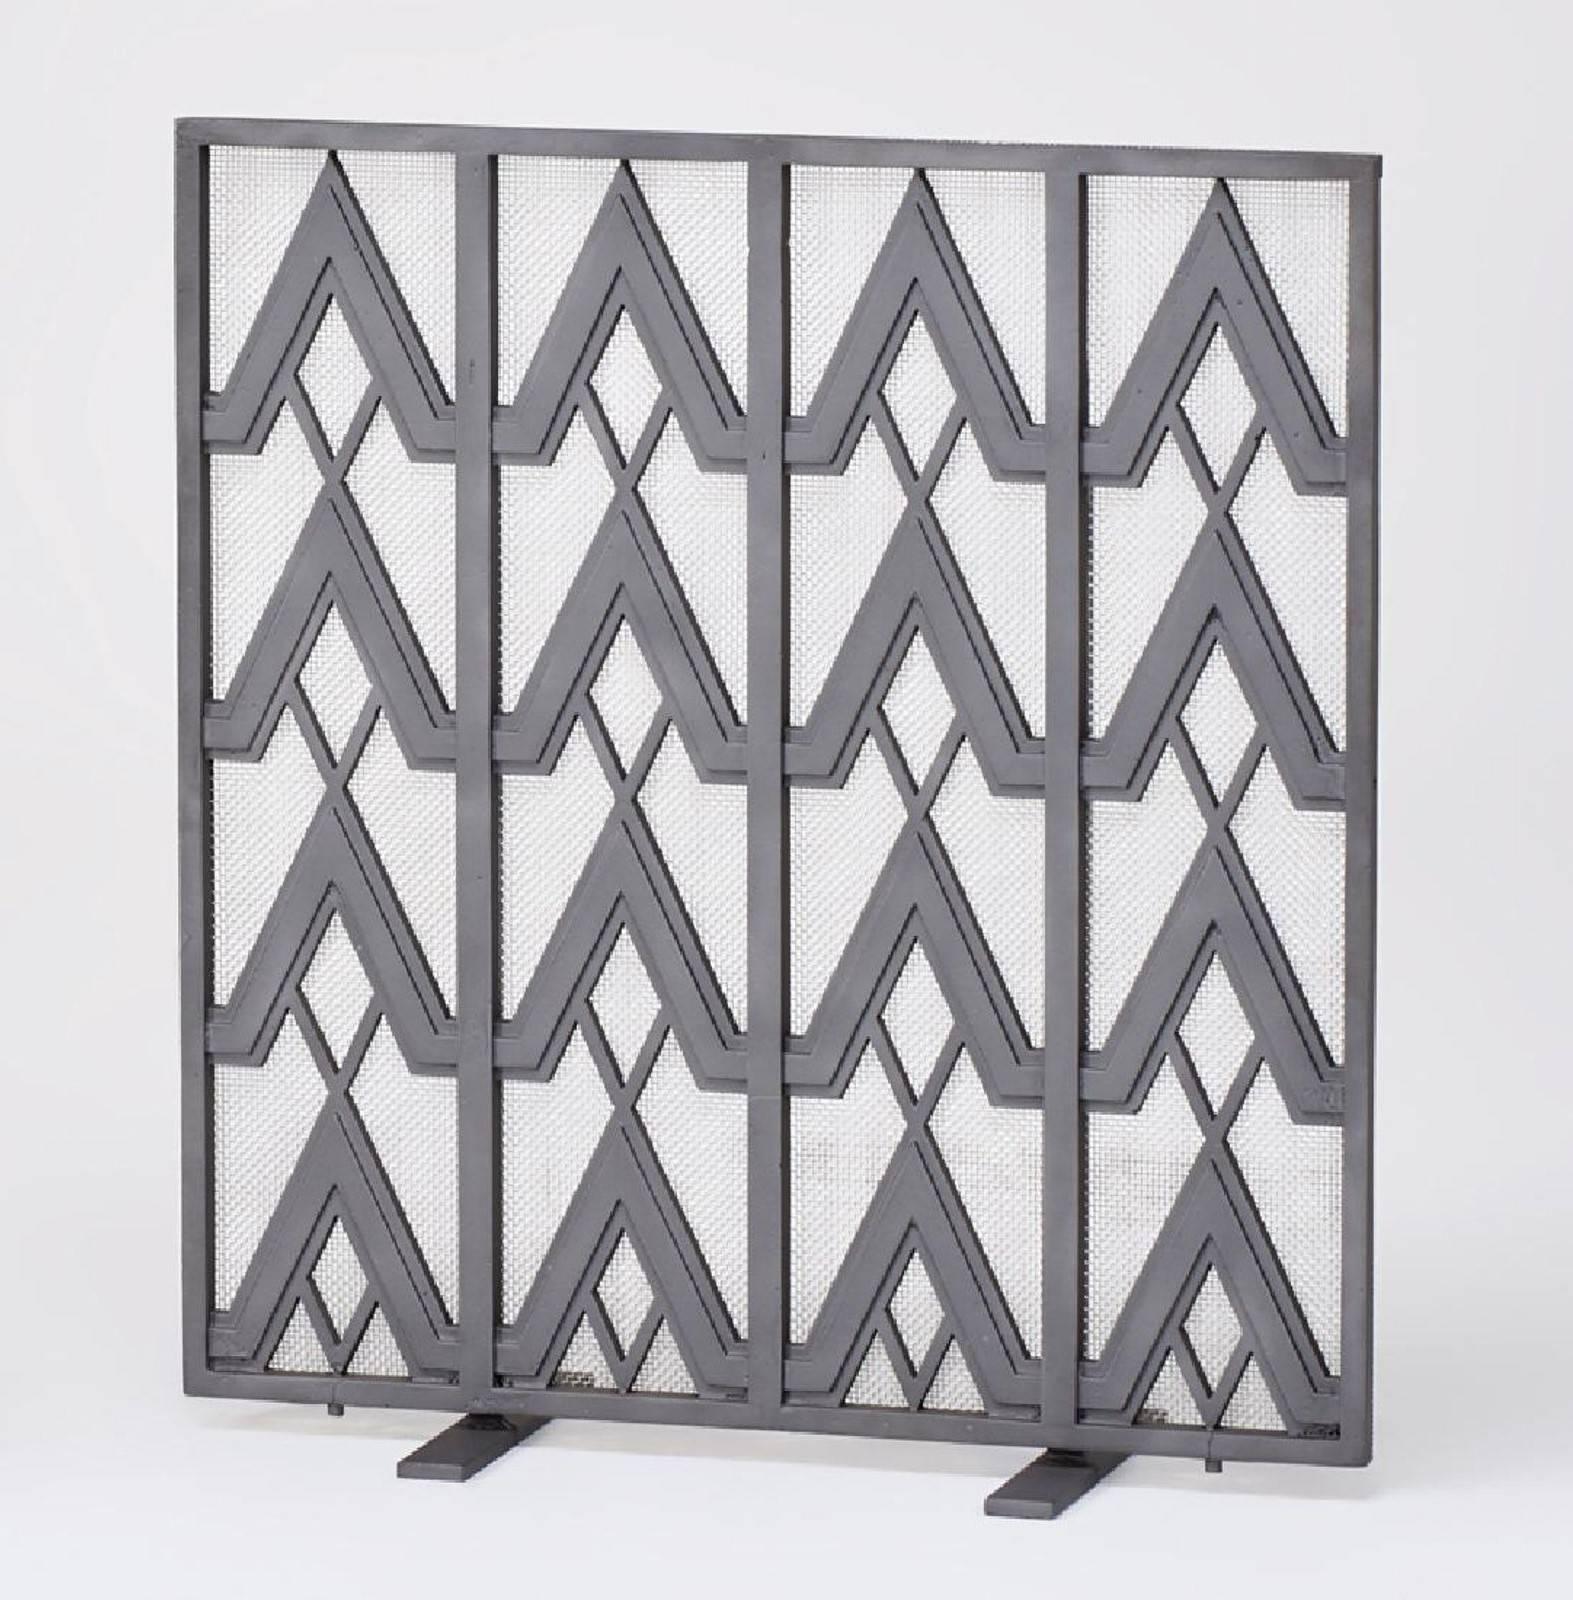 A forged iron Art Deco style fire screen featuring highly graphic geometric details overall.
The flat front panel depicting triangular shaped designs intersected by vertical stripes creating a functional .web of eye pleasing patterns
The iron is